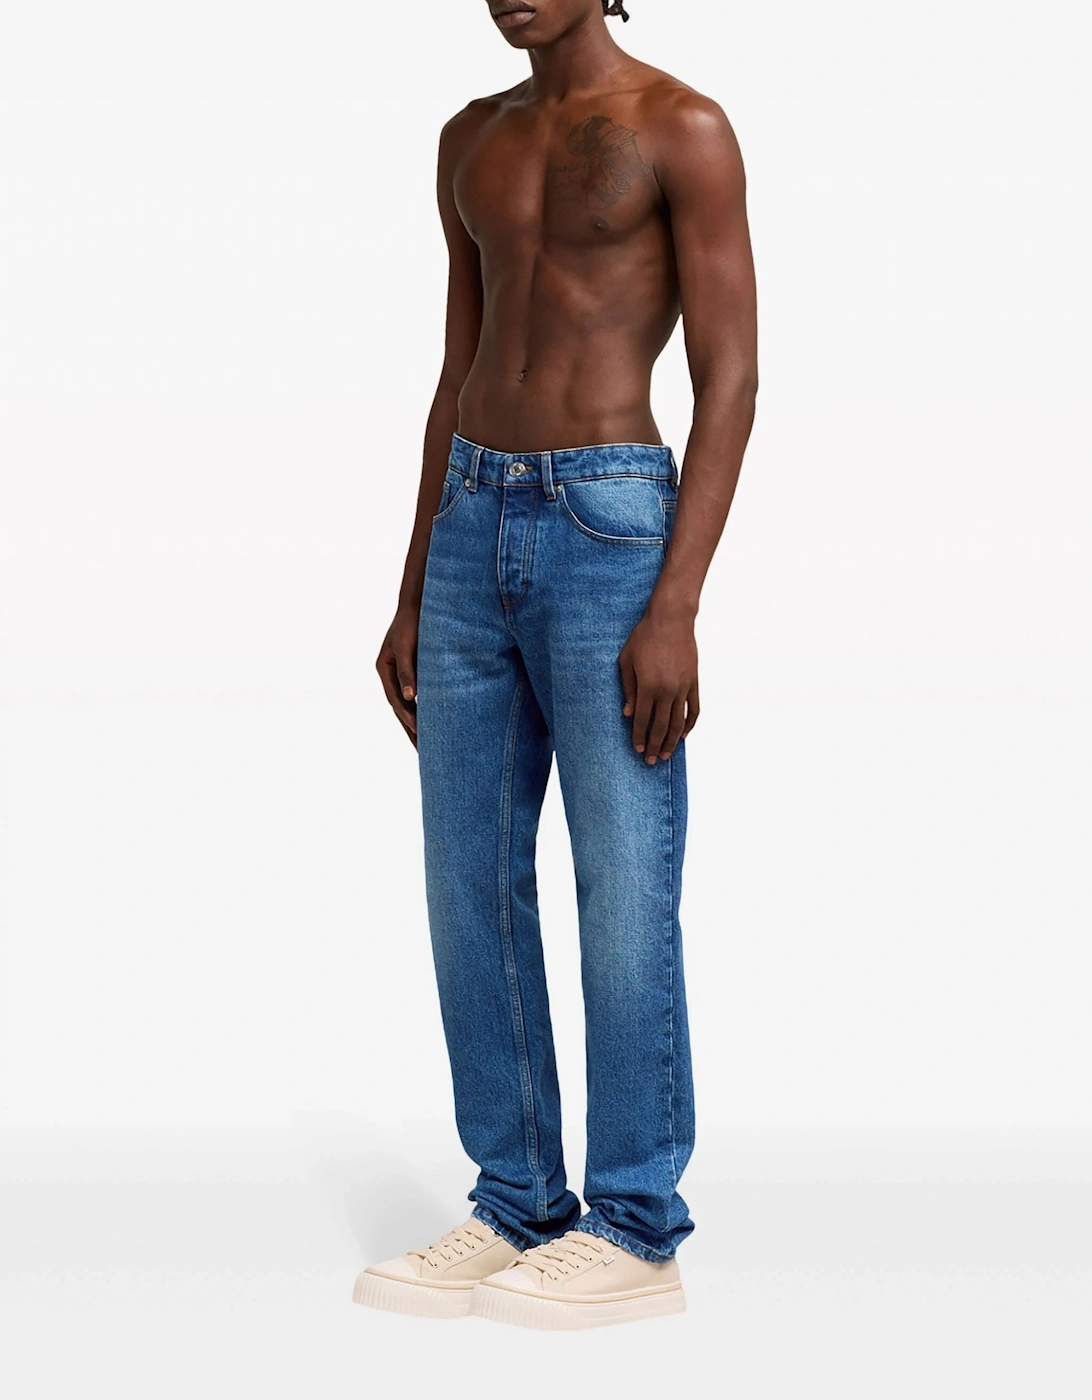 Classic Fit Washed Denim Jeans